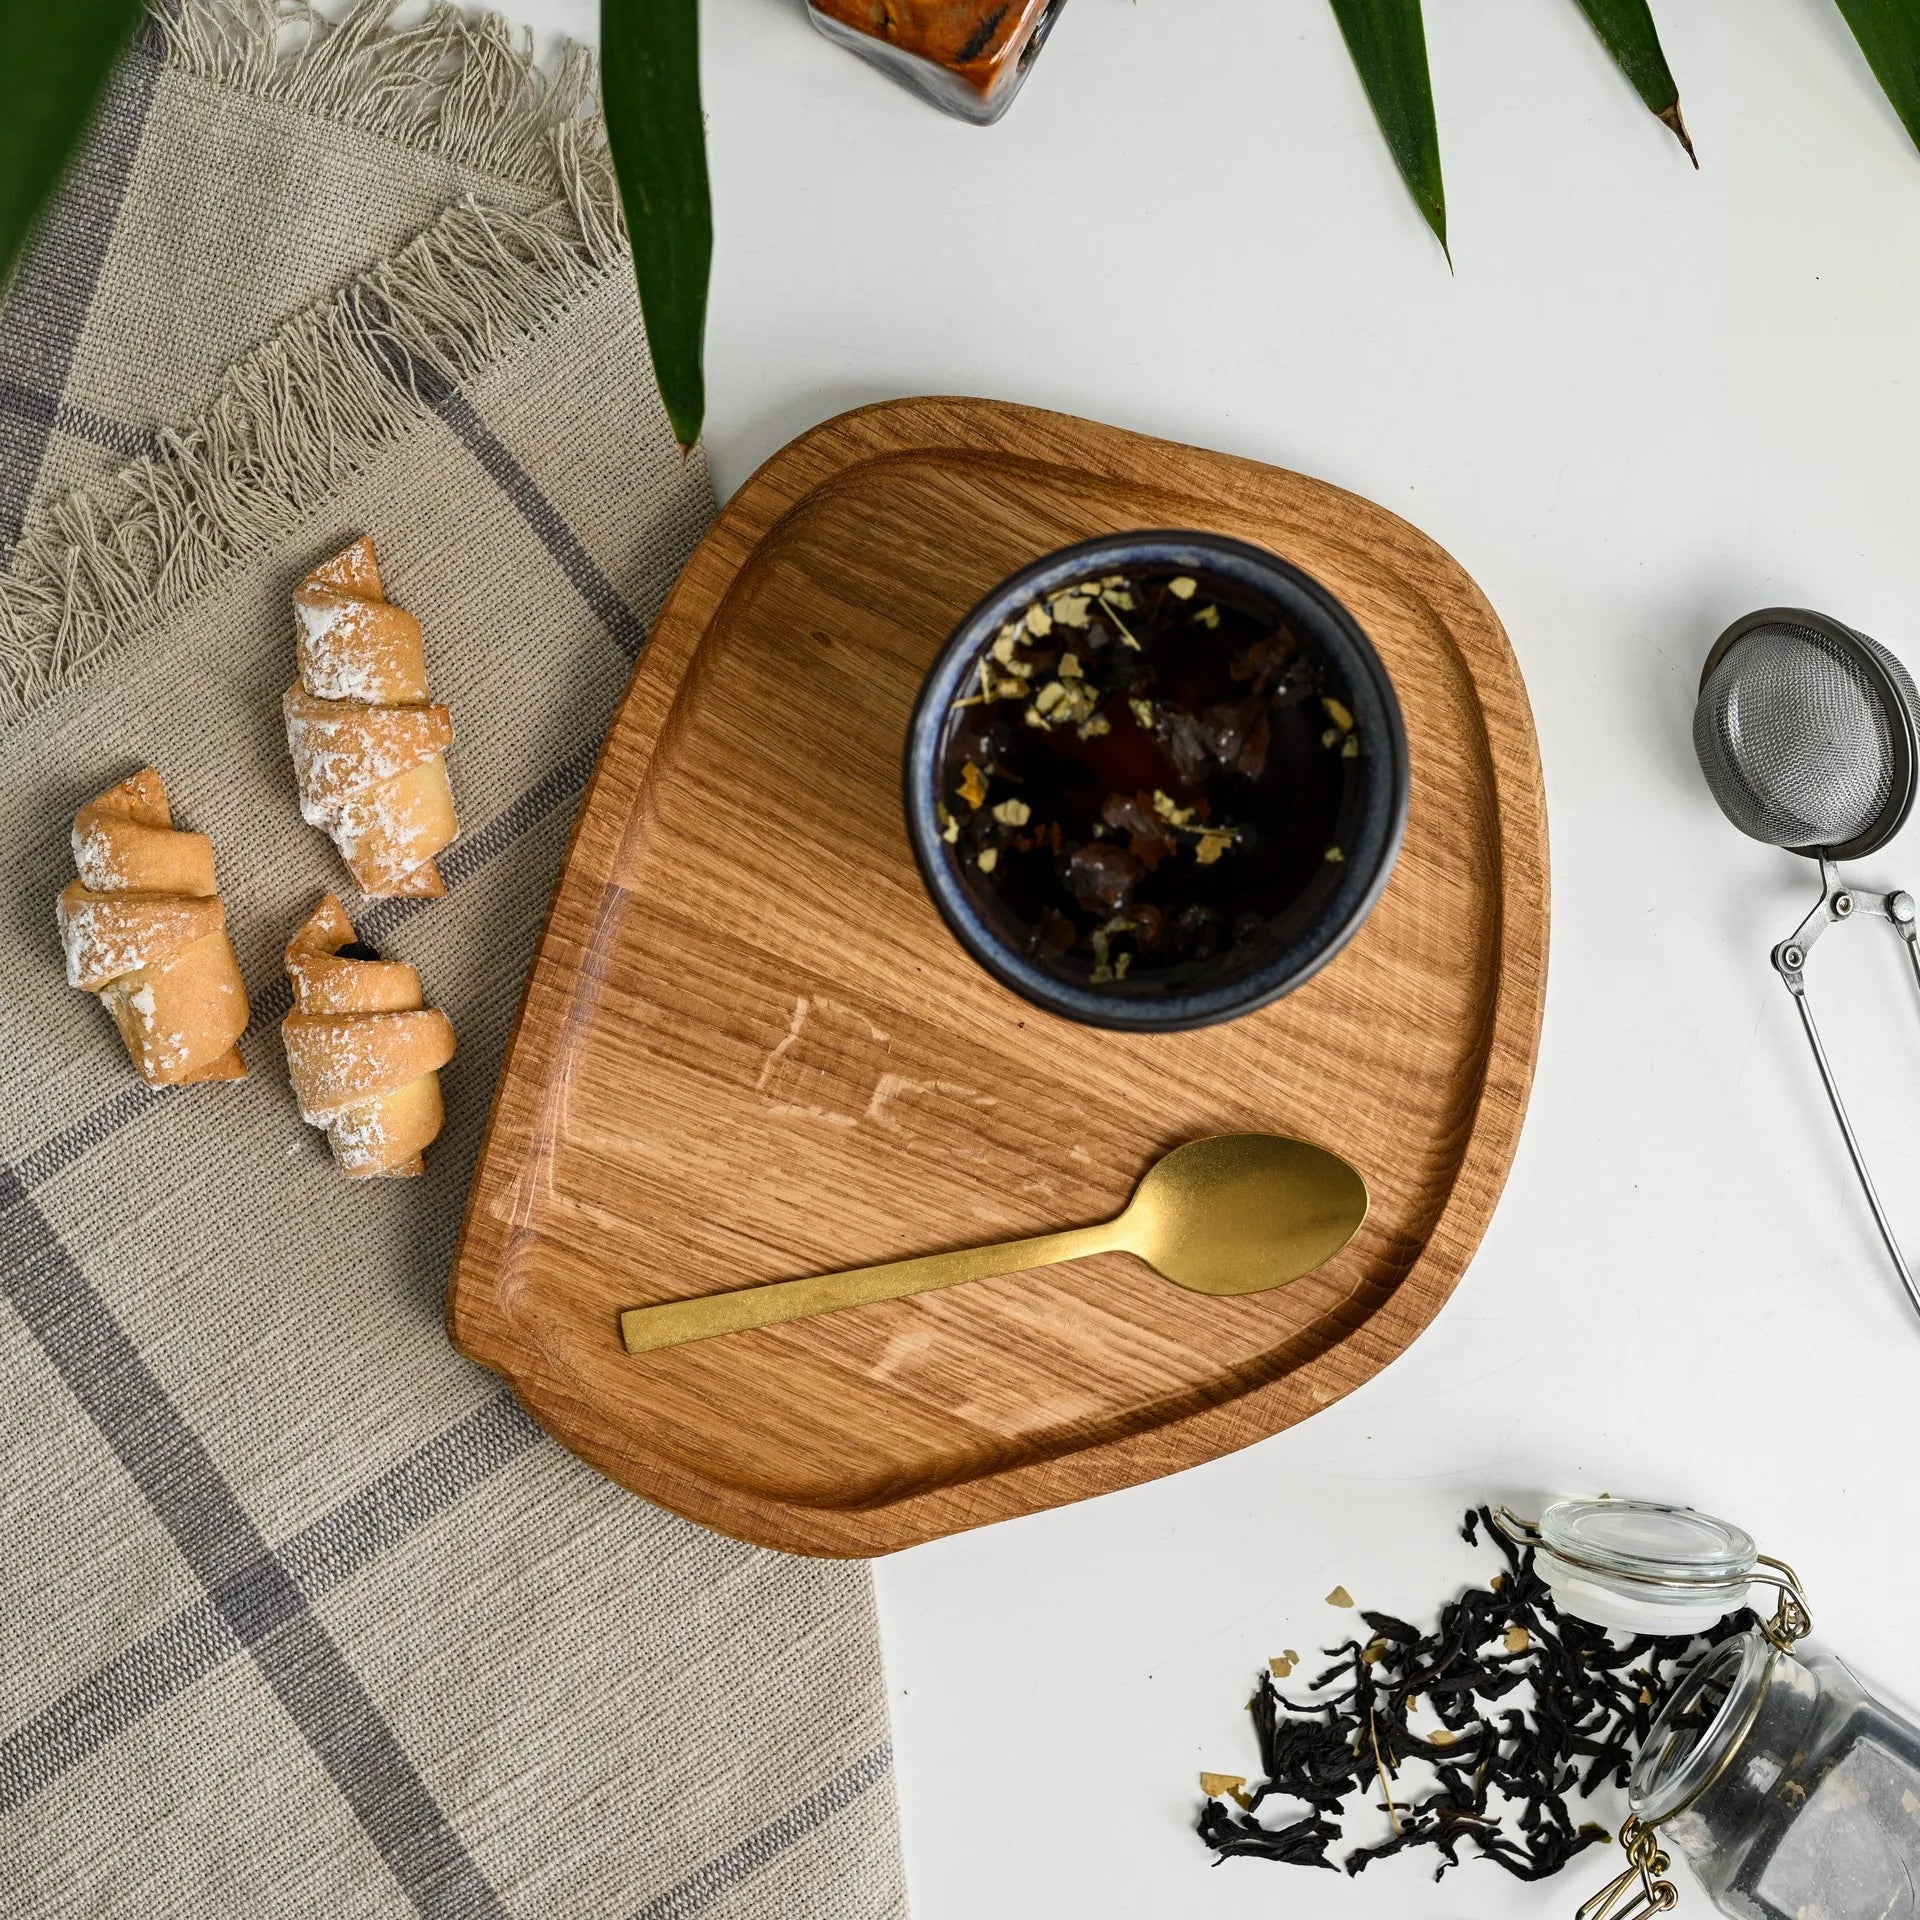 Personalized hotel tray, crafted for distinctive dining experiences